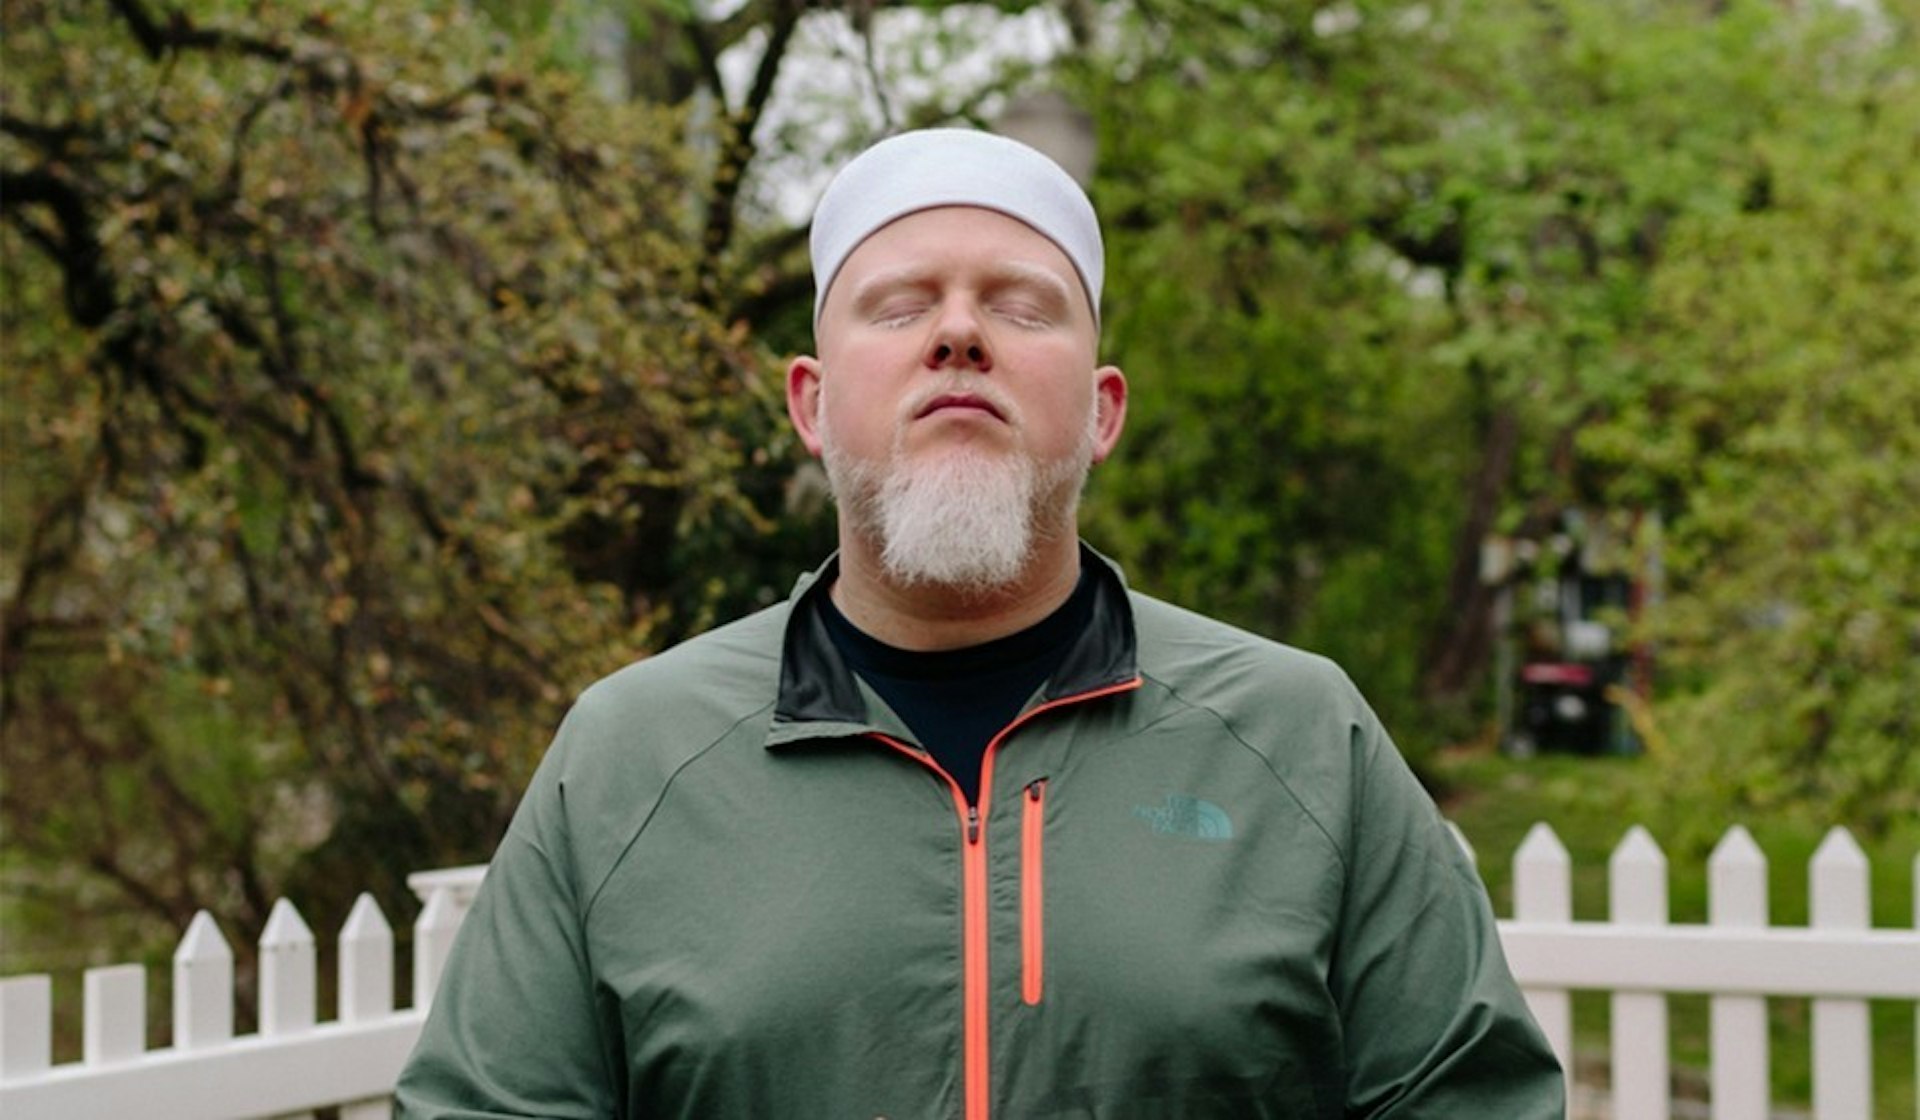 In hip-hop Brother Ali found faith and identity